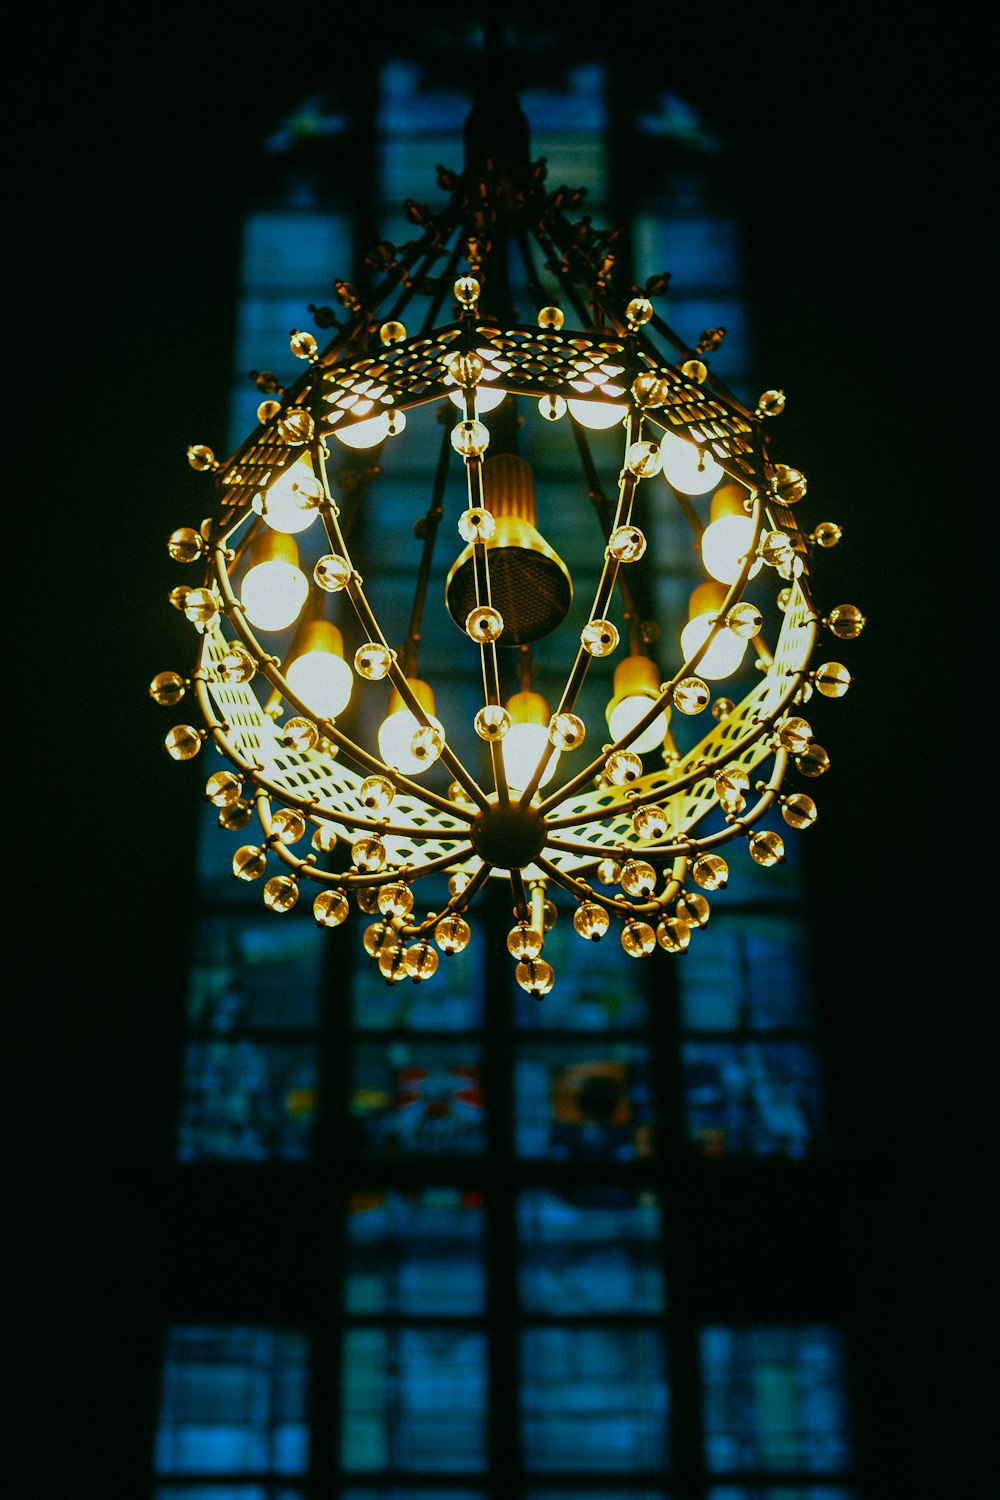 yellow lighted chandelier with stained glass window background